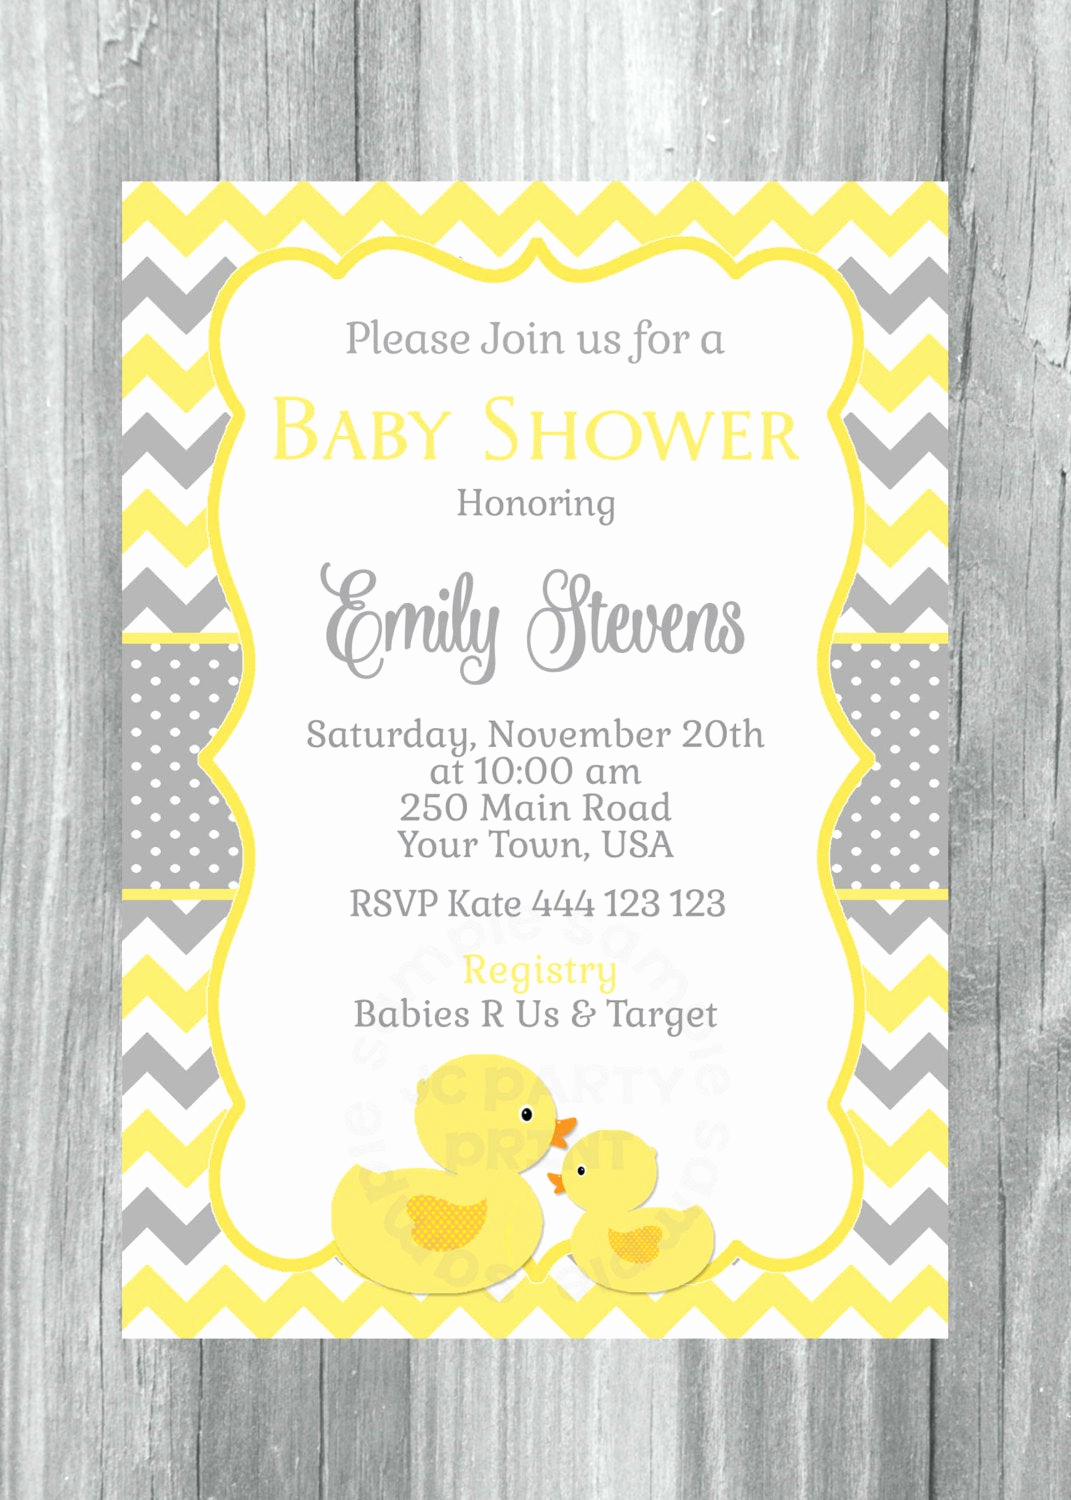 Rubber Duck Baby Shower Invitation Fresh Rubber Ducky Baby Shower Invitation Rubber Duck Yellow and